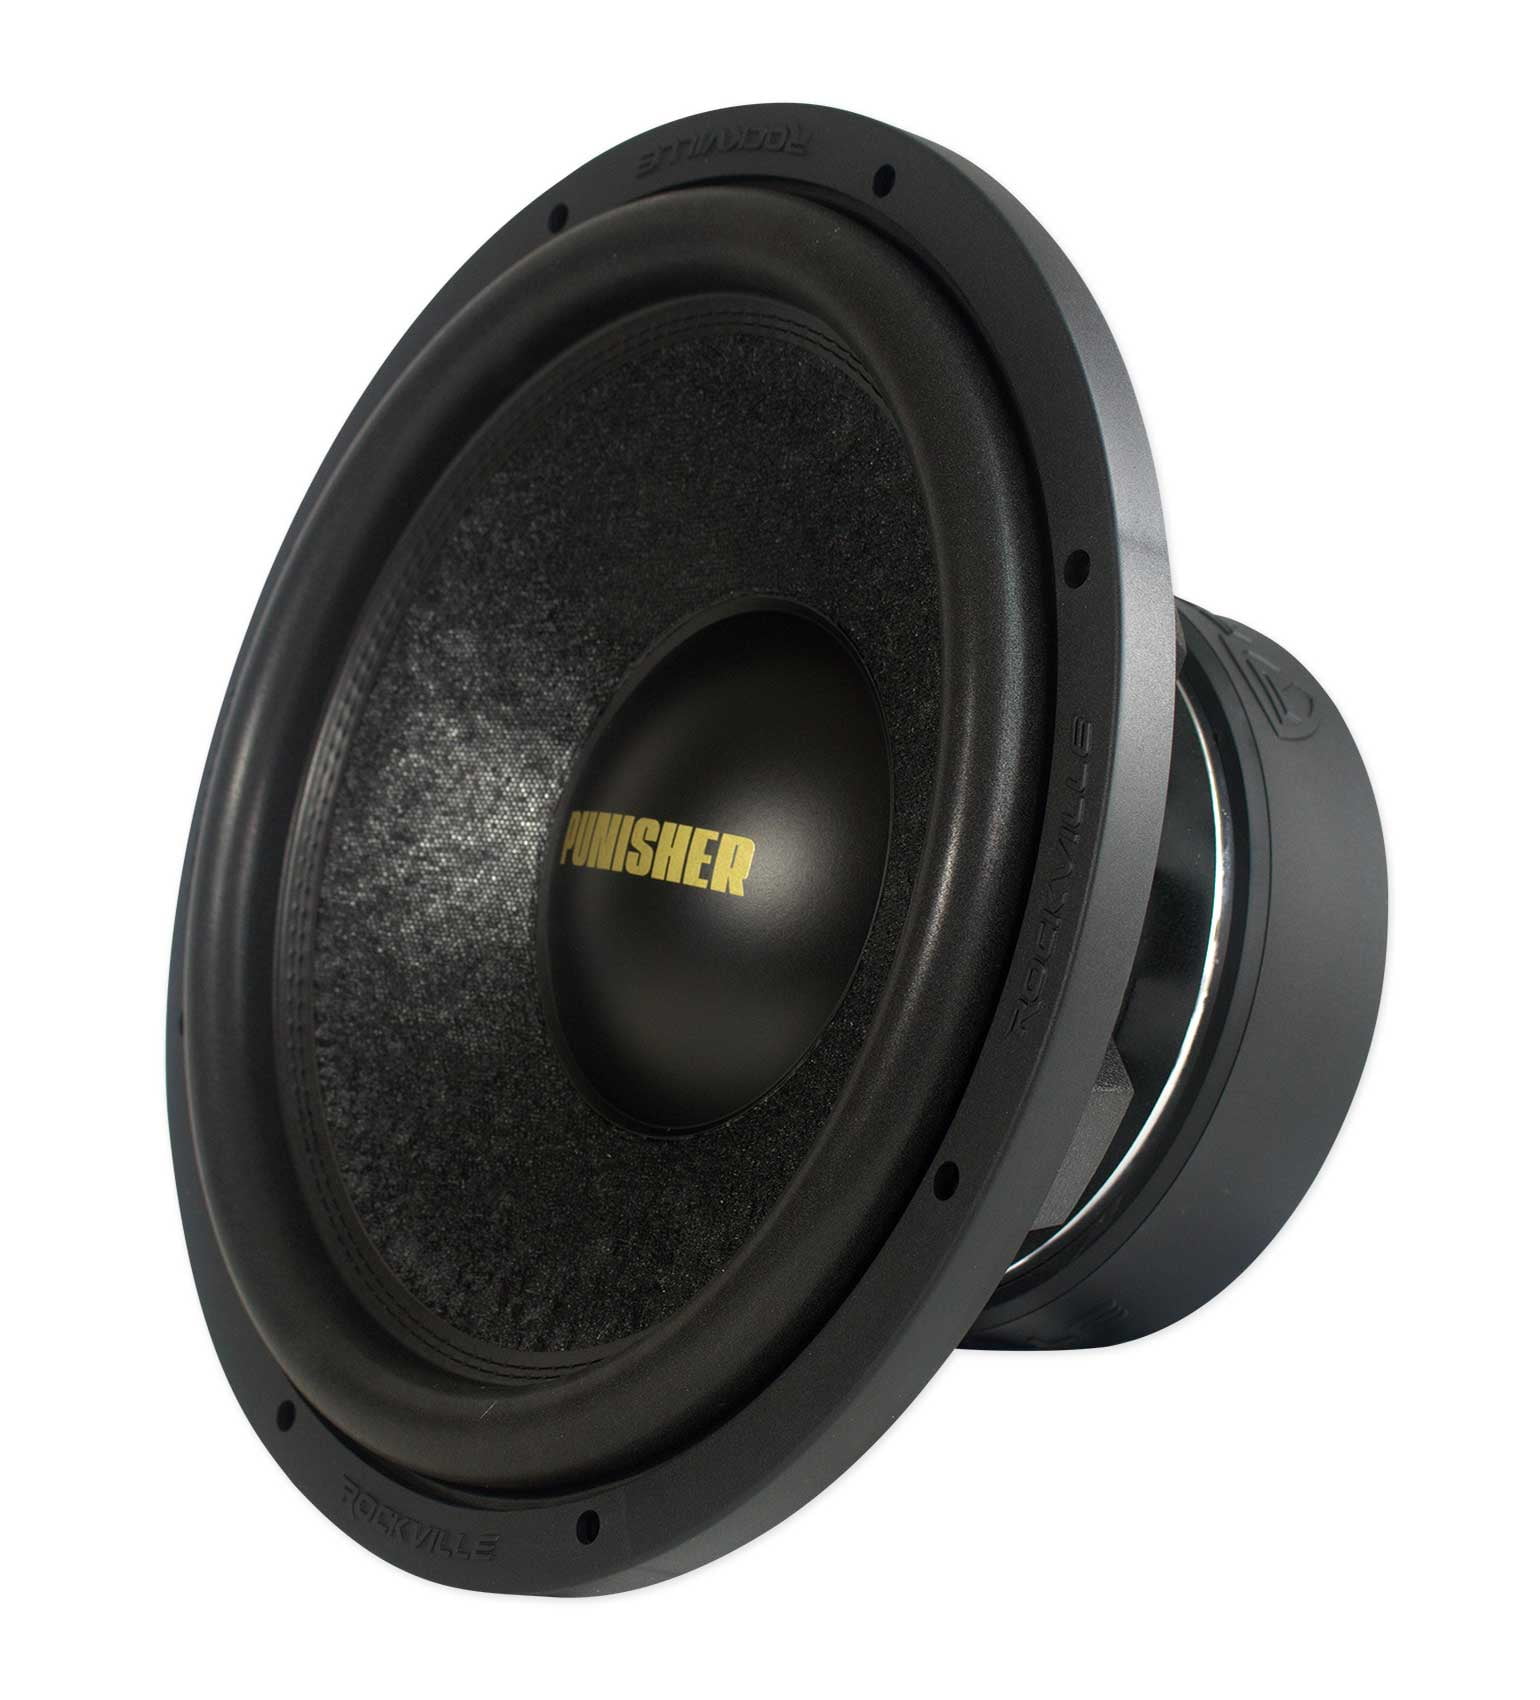 Rockville Punisher 15D2 15" 6000w Peak Competition Car Audio Subwoofer Dual 2-Ohm Sub 1500w RMS CEA Rated